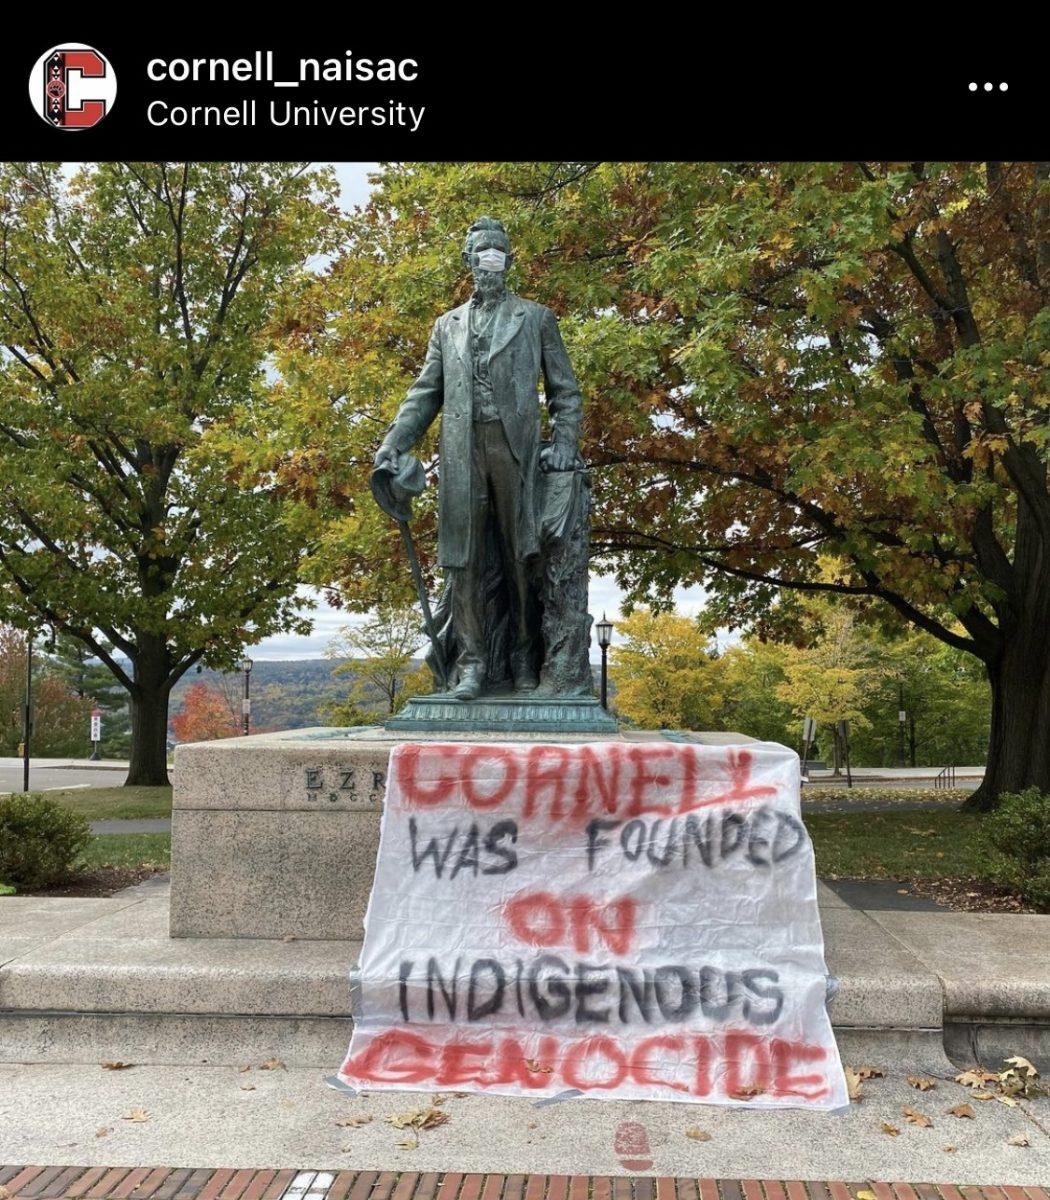 Native American and Indigenous Students at Cornell seek justice from University